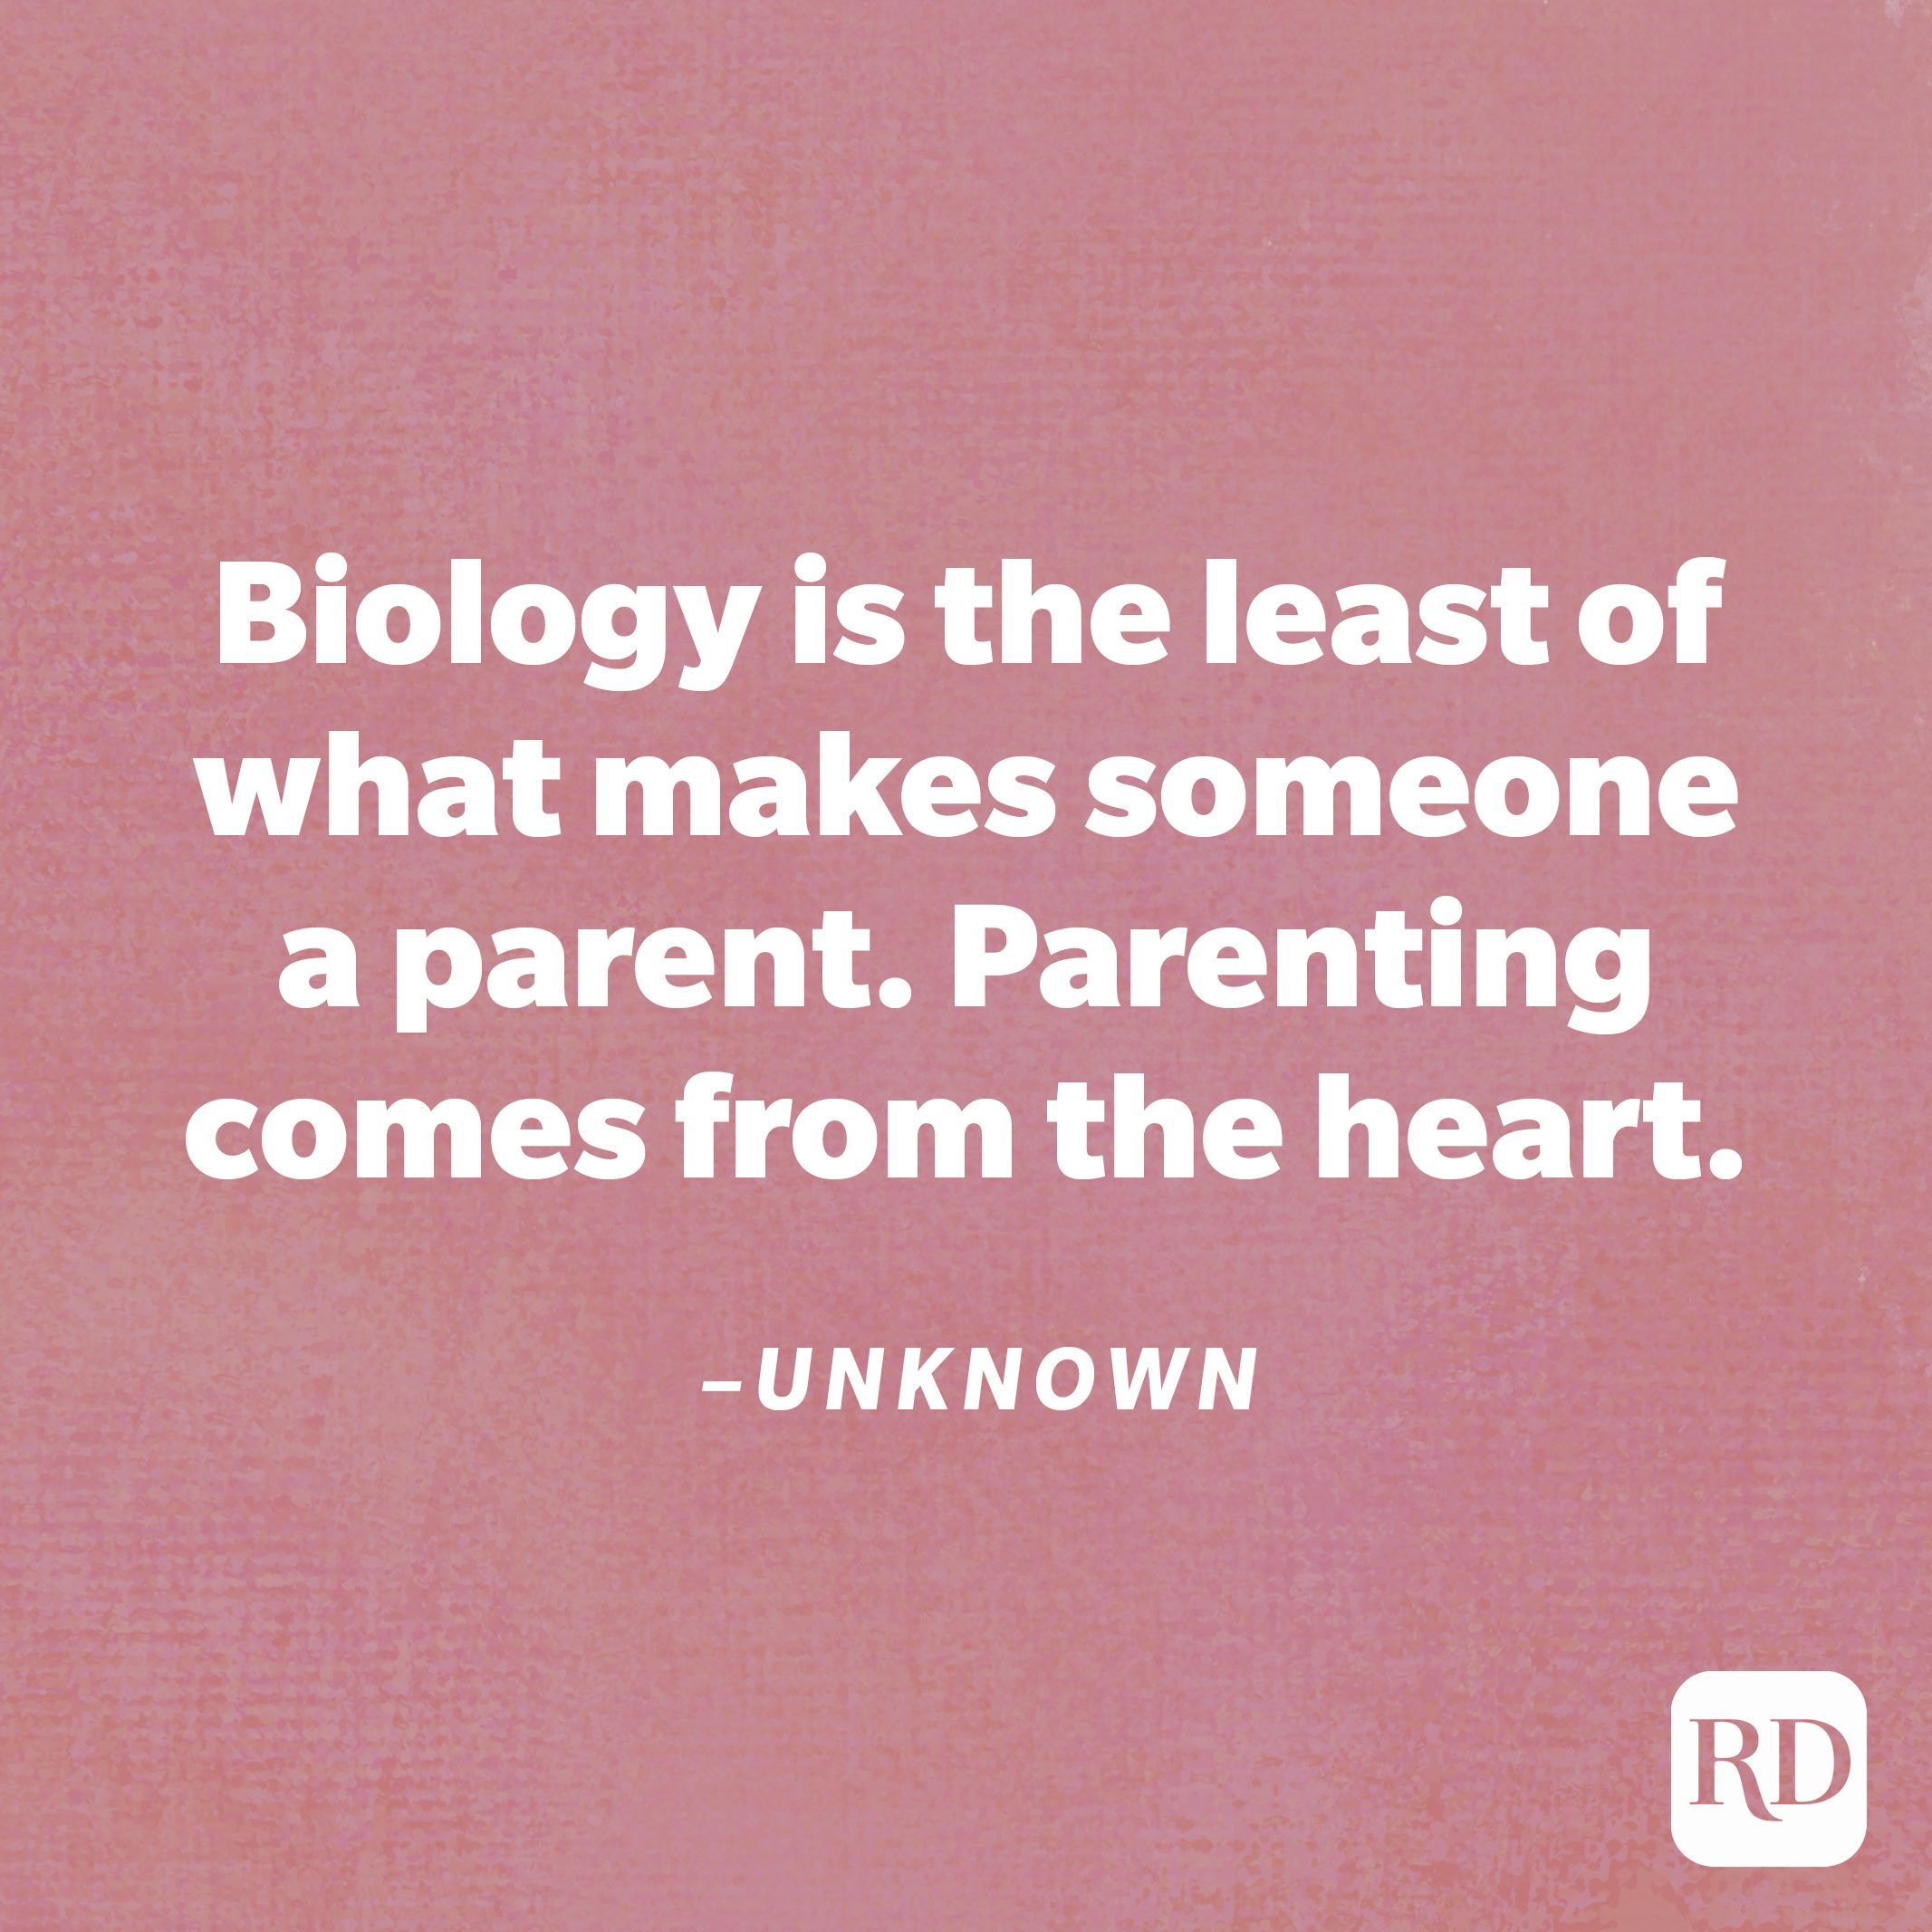 "Biology is the least of what makes someone a parent. Parenting comes from the heart."—Unknown